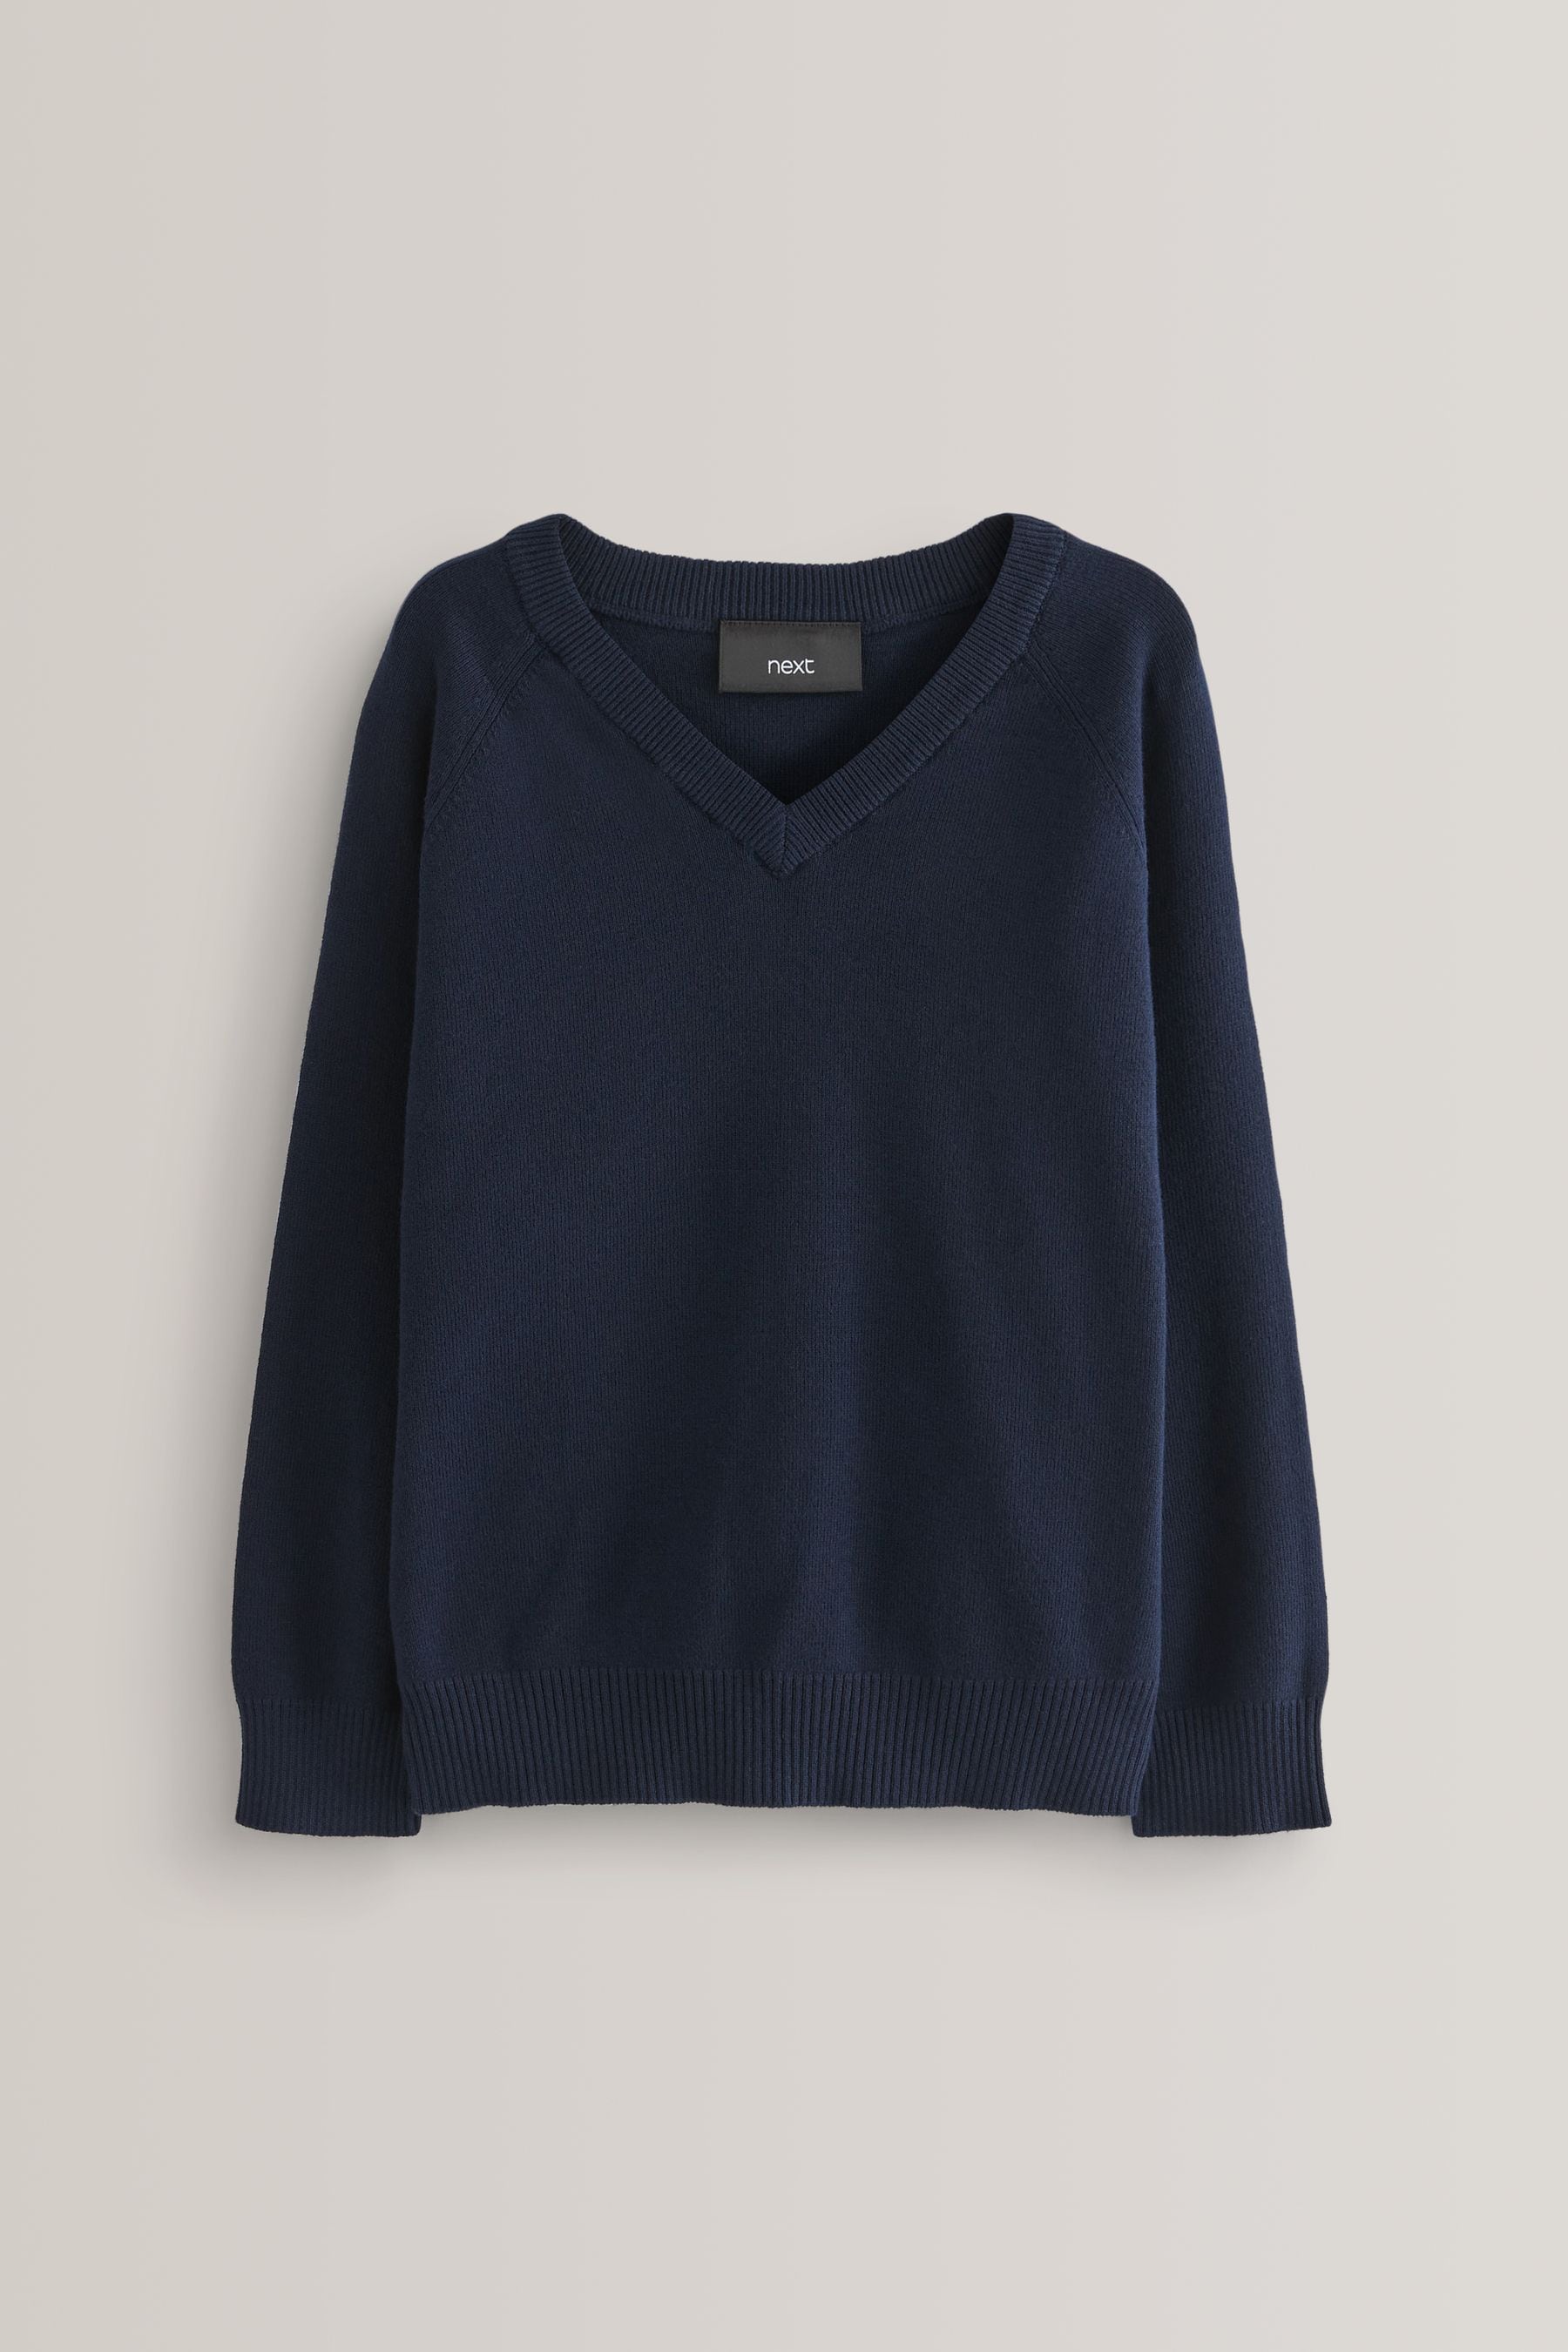 Buy Knitted V-Neck School Jumper (3-18yrs) from the Next UK online shop